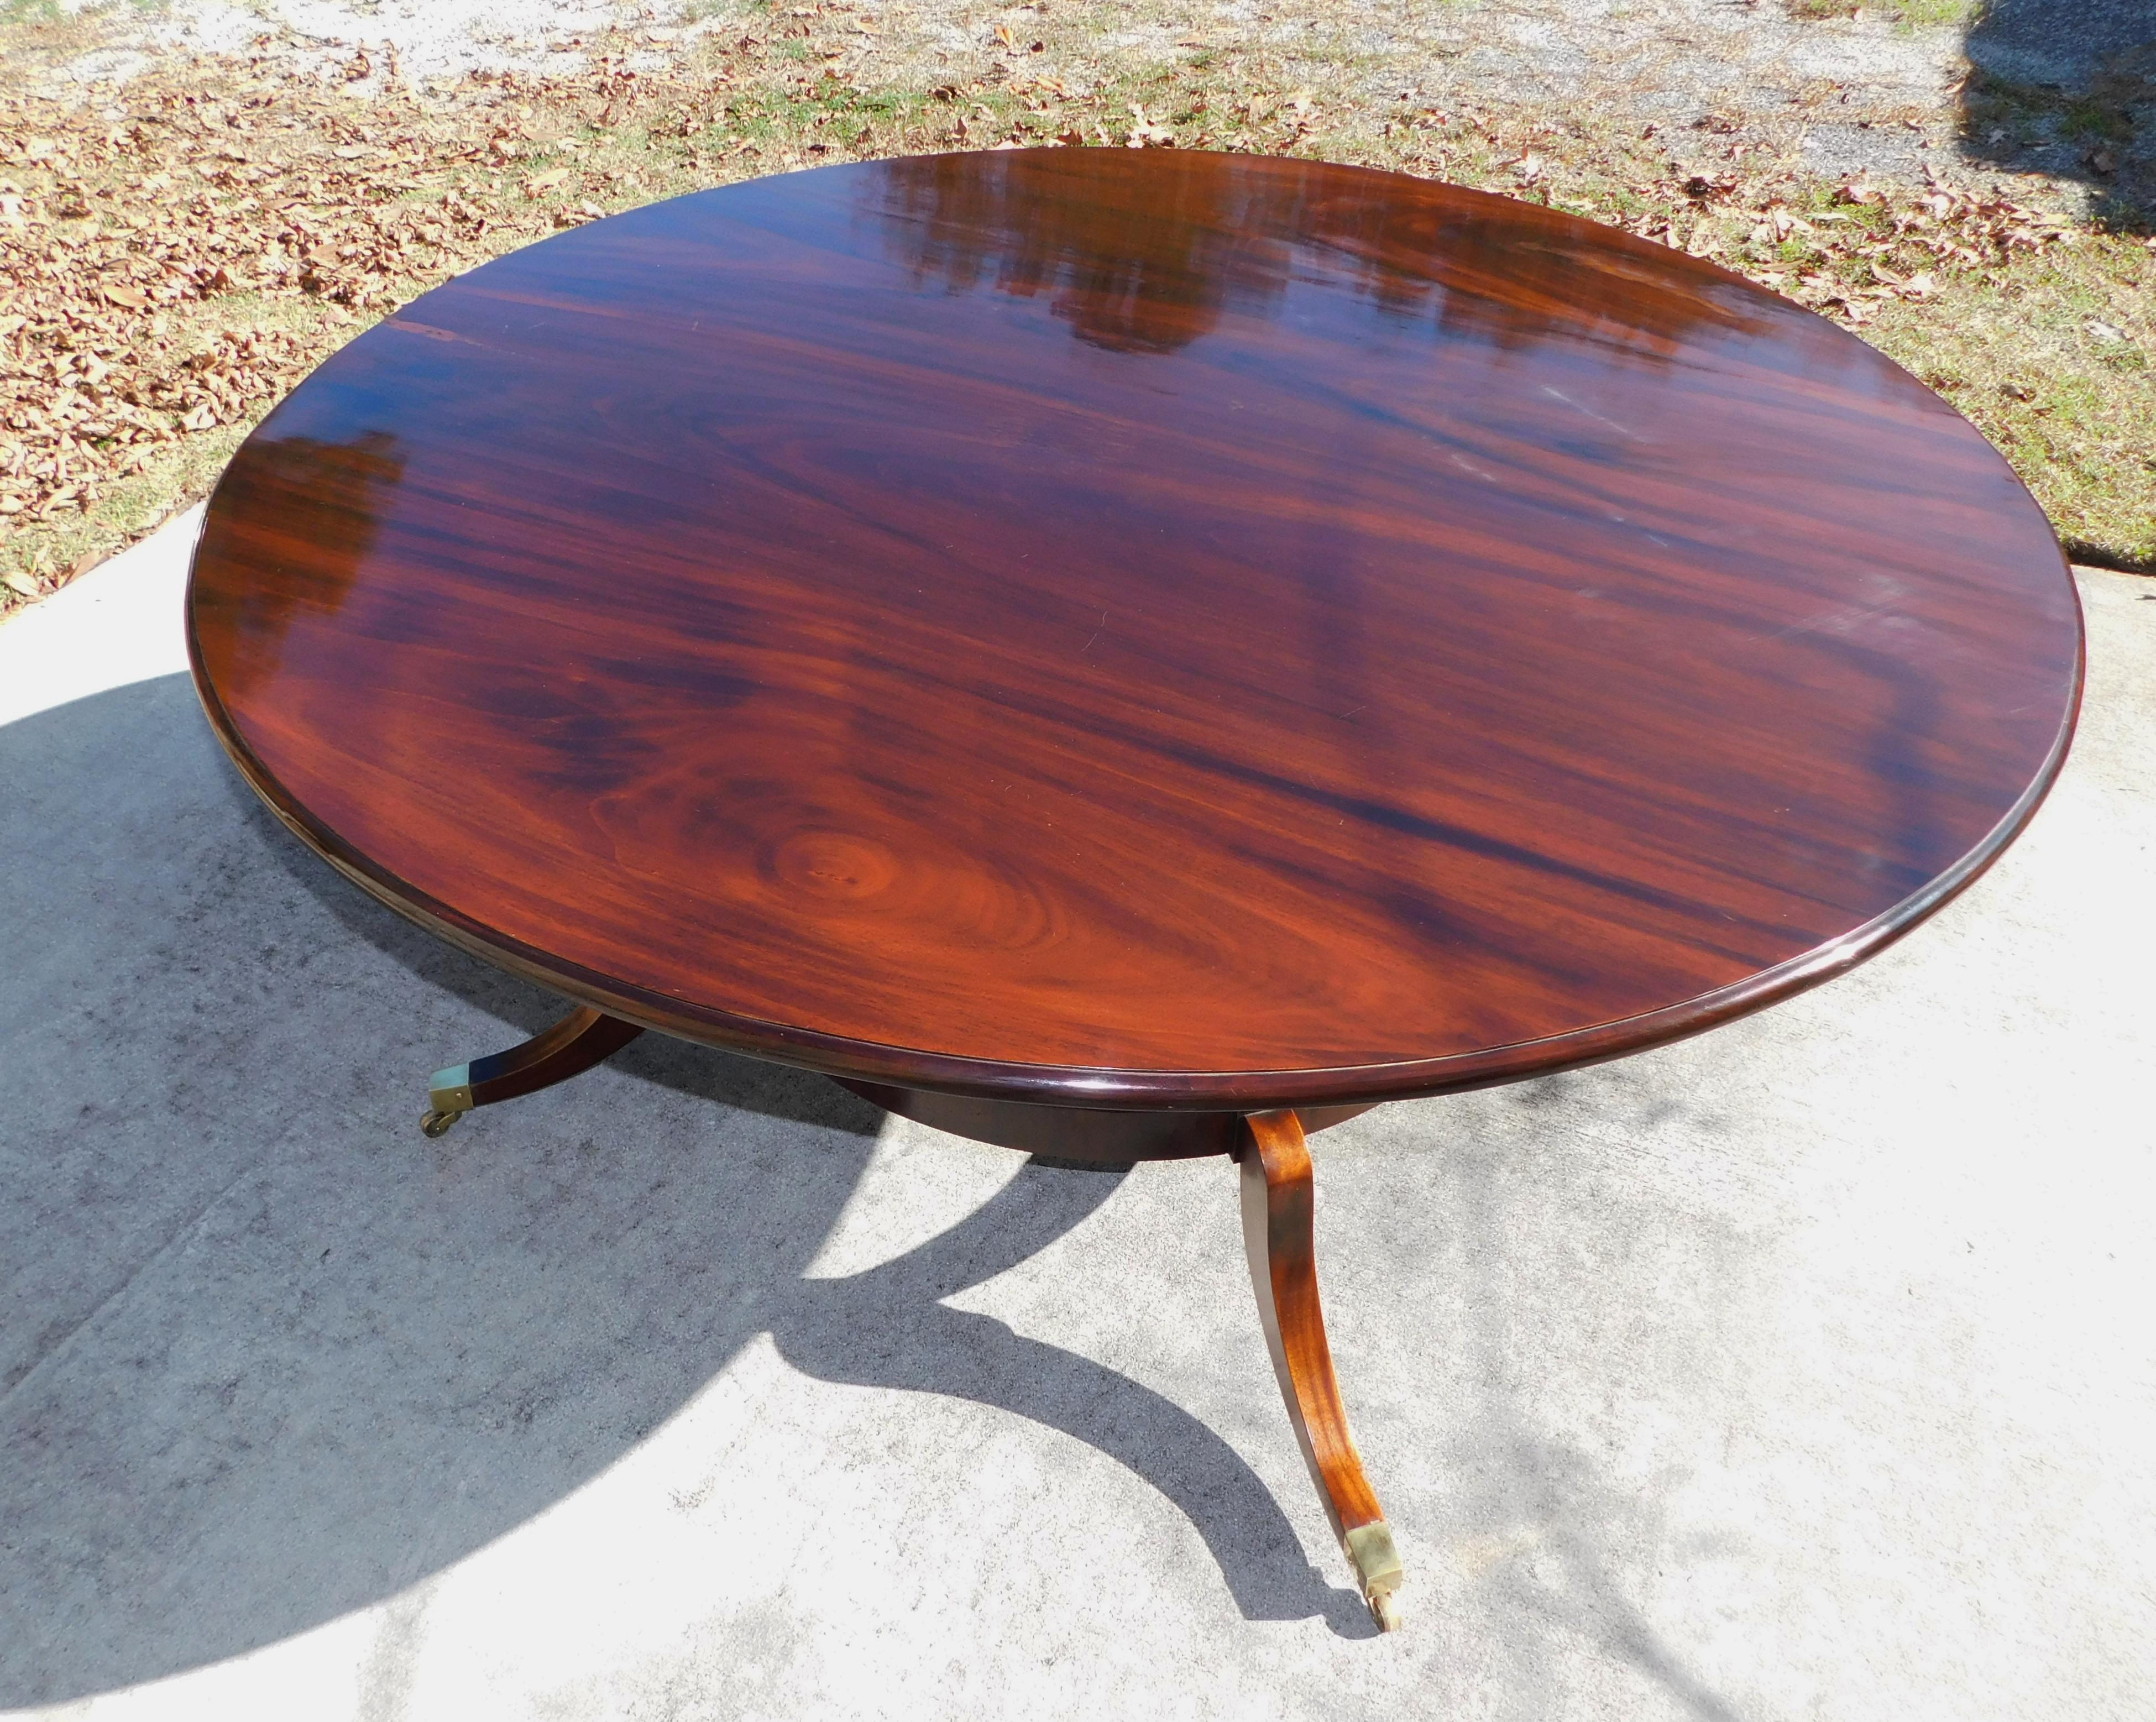 English Regency Mahogany Circular Dining Table with Splayed Legs on Casters 1850 In Excellent Condition For Sale In Hollywood, SC